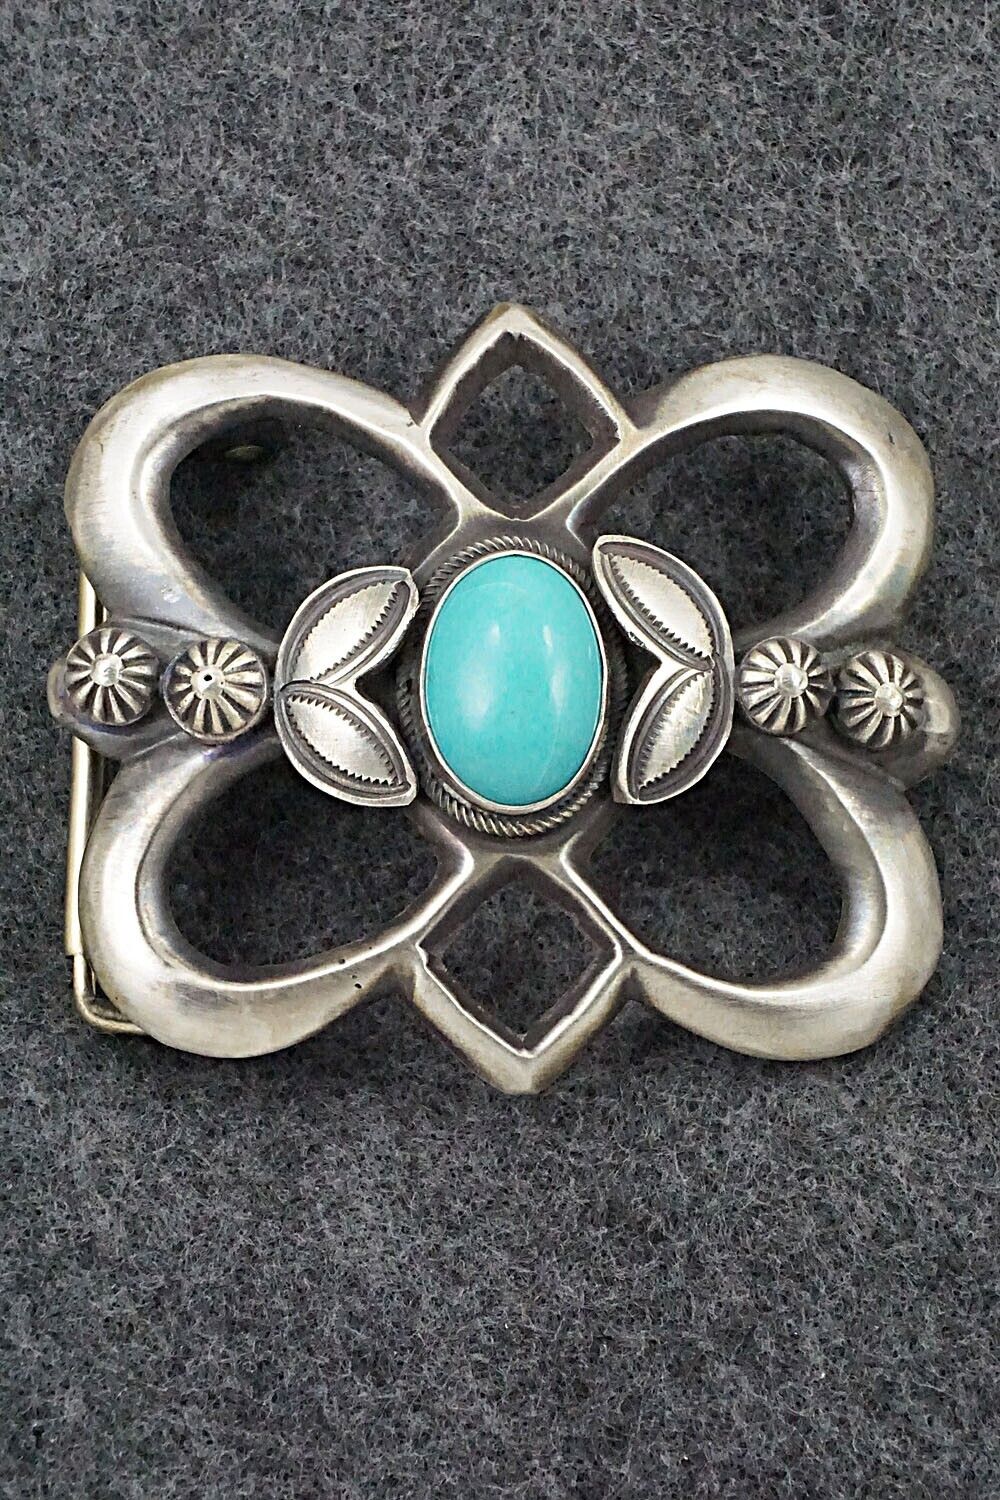 Turquoise & Sterling Silver Belt Buckle - Henry Morgan